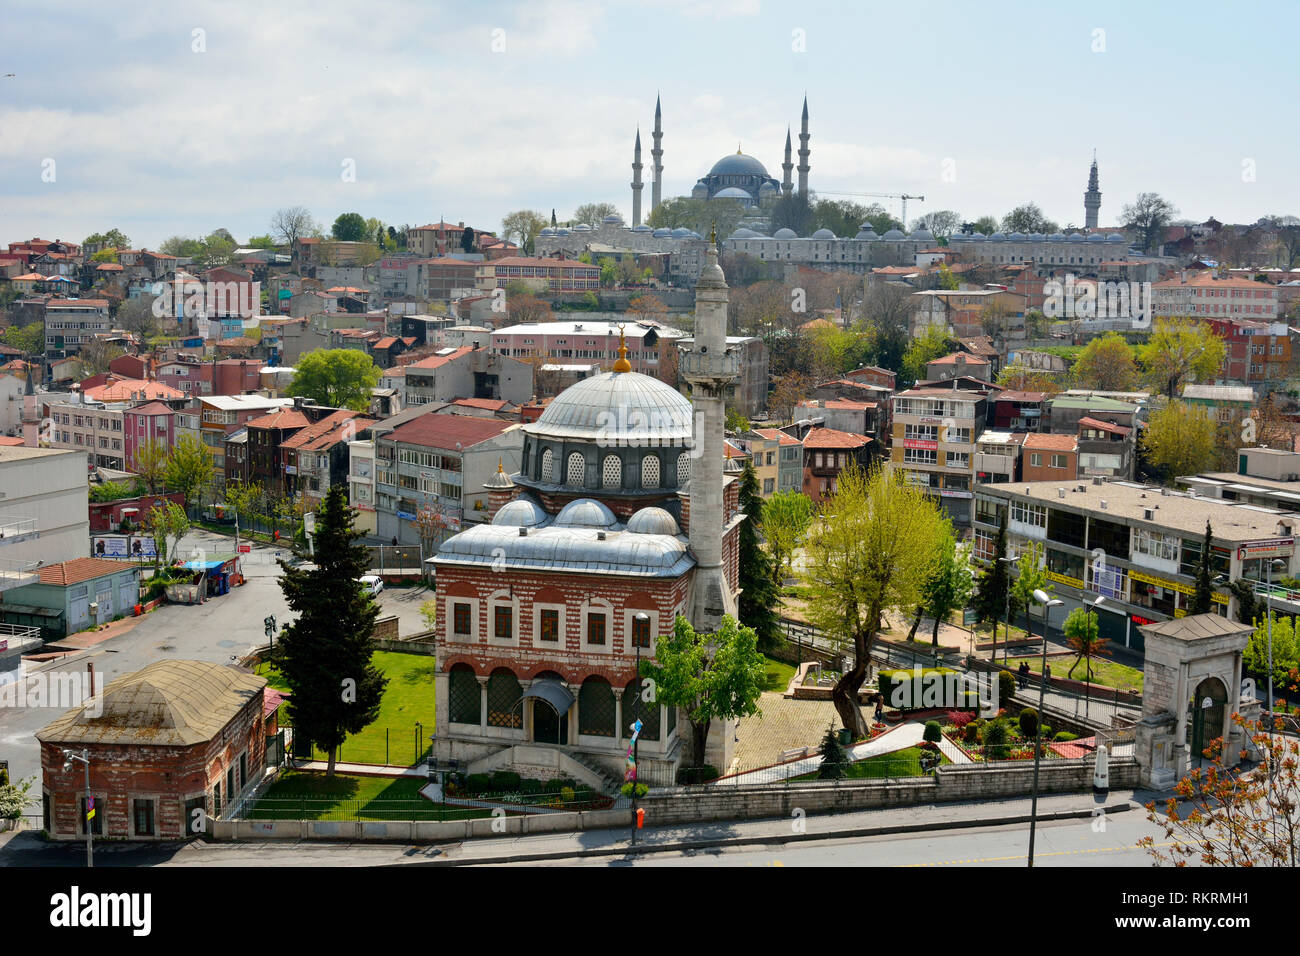 Istanbul, Turkey - April 23, 2017. View of Fatih district of Istanbul, toward Sep Sefa Hatun mosque and Suleymaniye mosque. Stock Photo